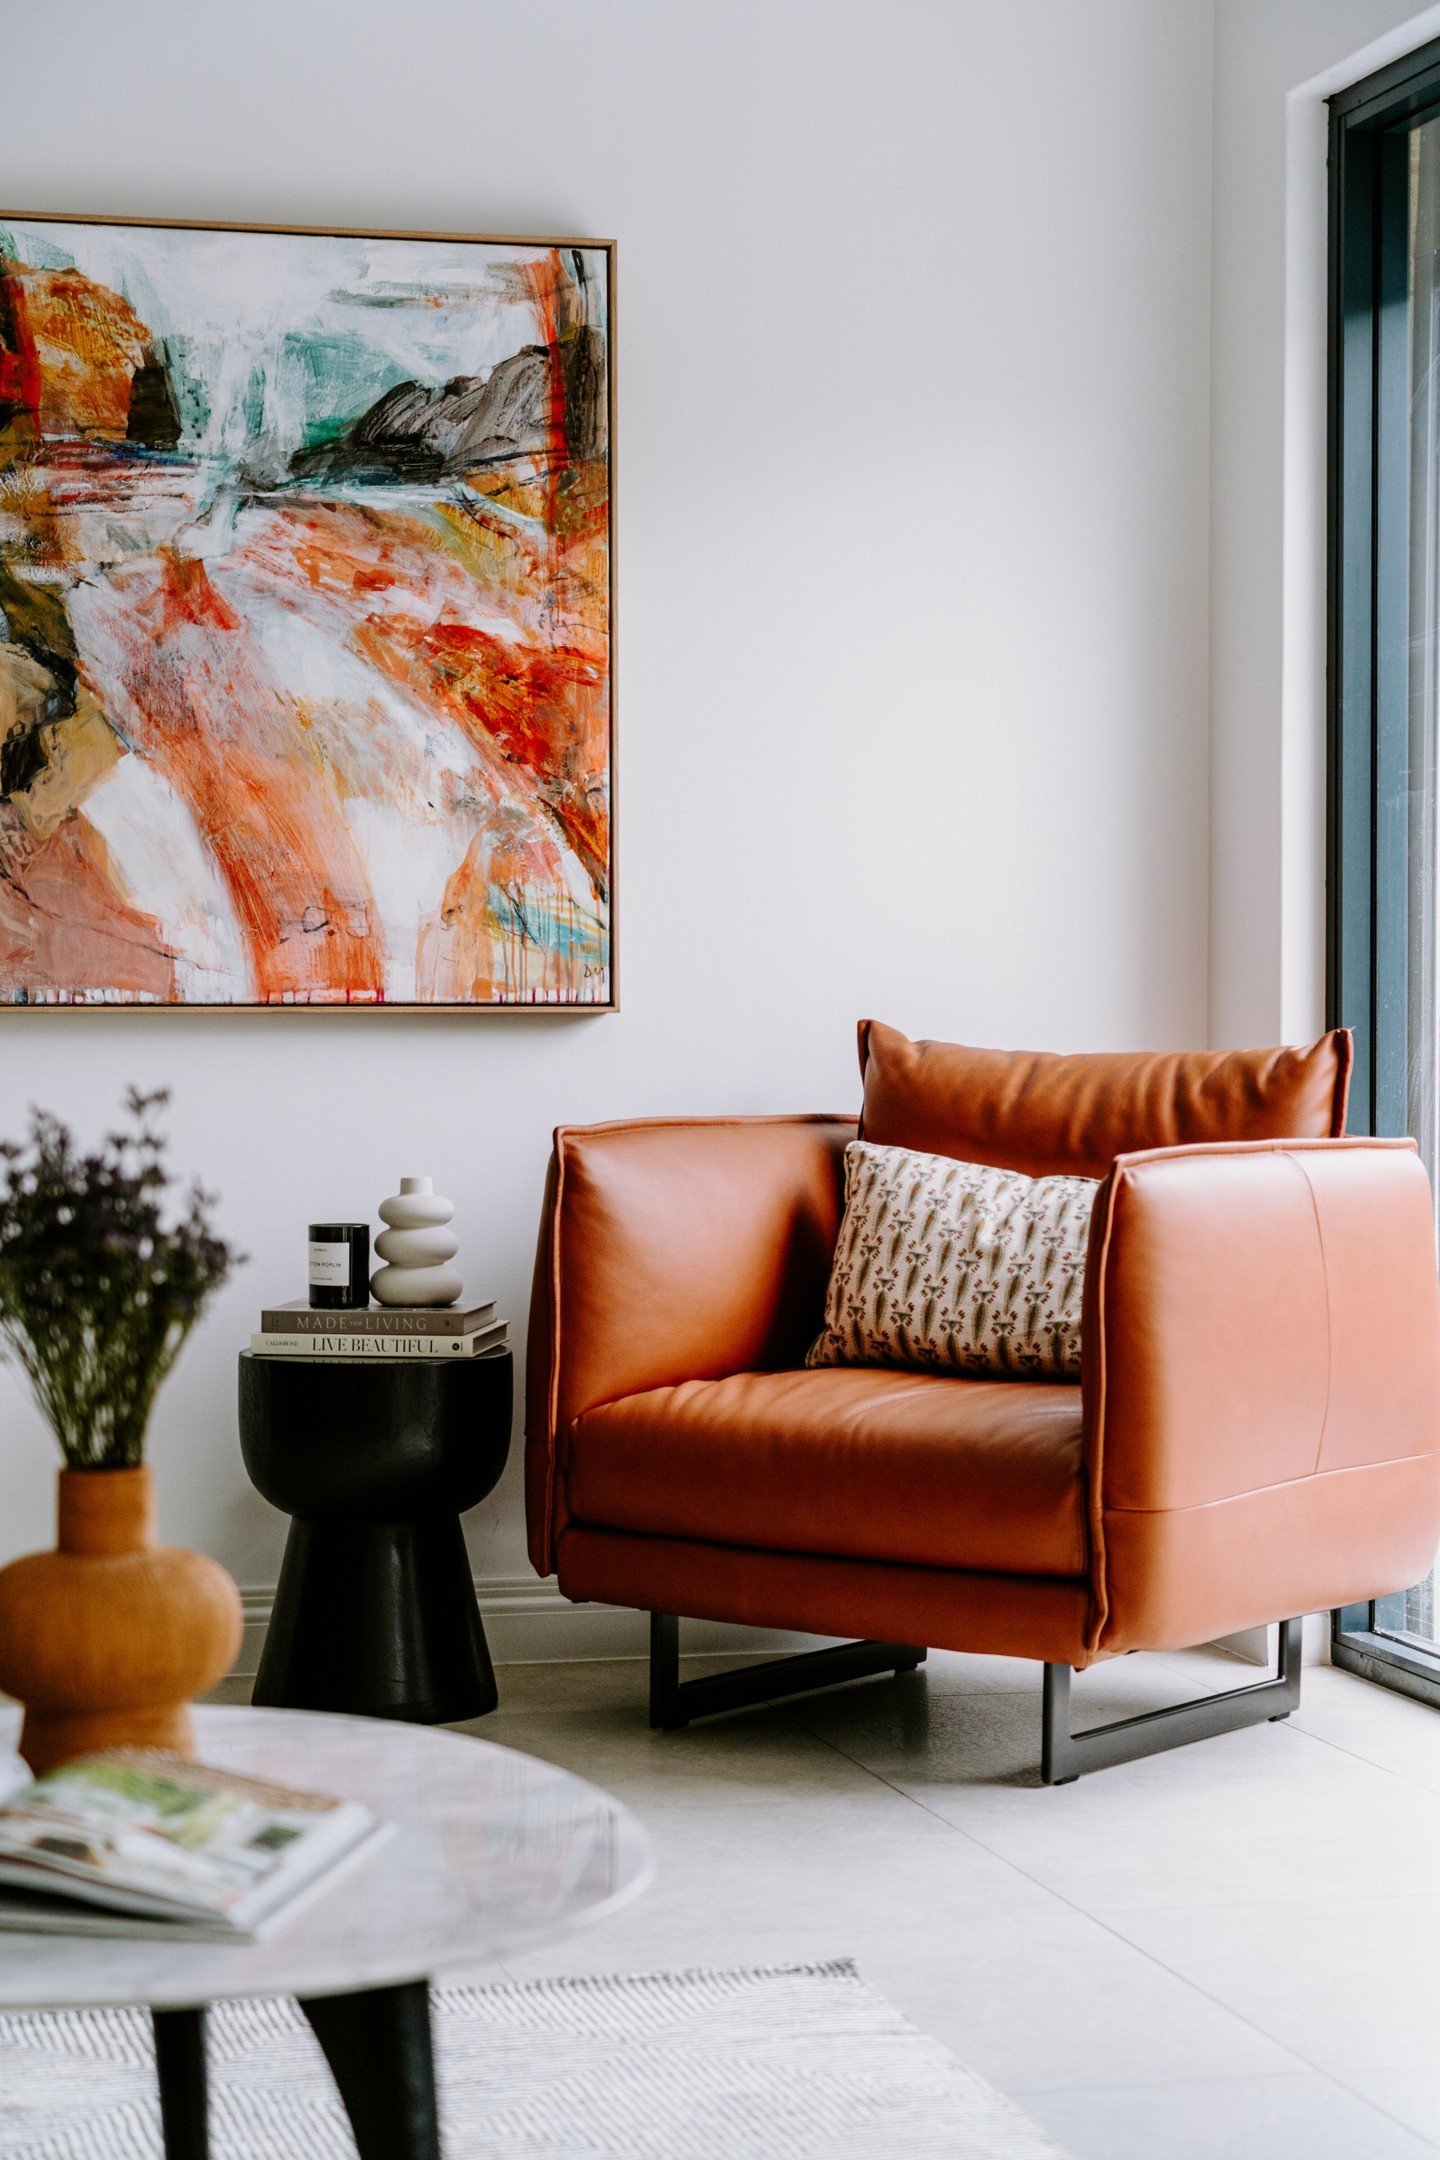 ✨ How to Create a Cohesive Living Room Design ✨

Designing a living room that feels cohesive and stylish can seem daunting, but with a few key principles, you can create a space that flows beautifully. Here are 5 tips to help you achieve a harmonious